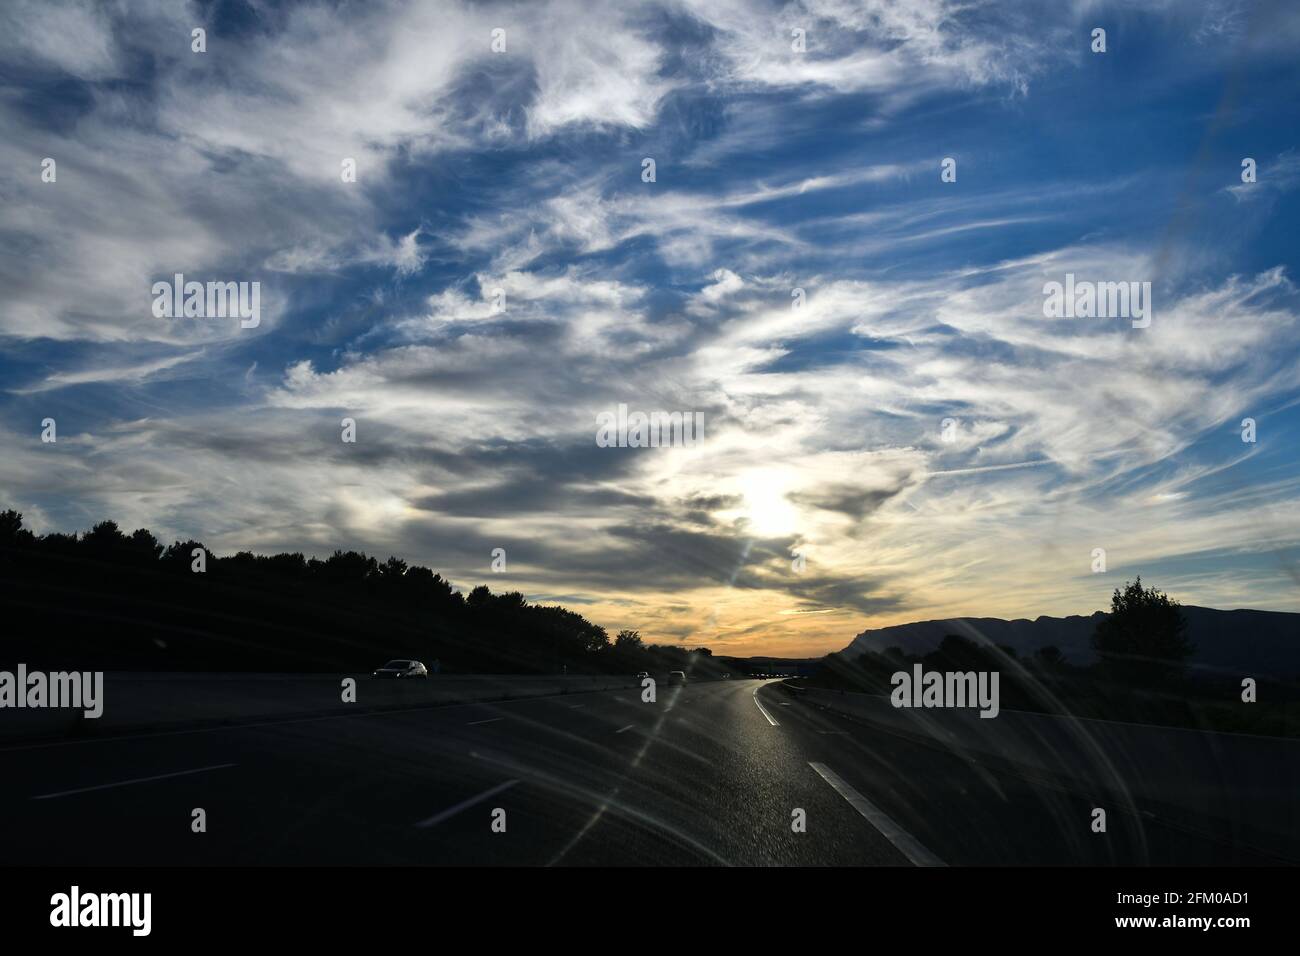 Sun setting on the highway in Montpellier, Occitanie, south of France Stock Photo